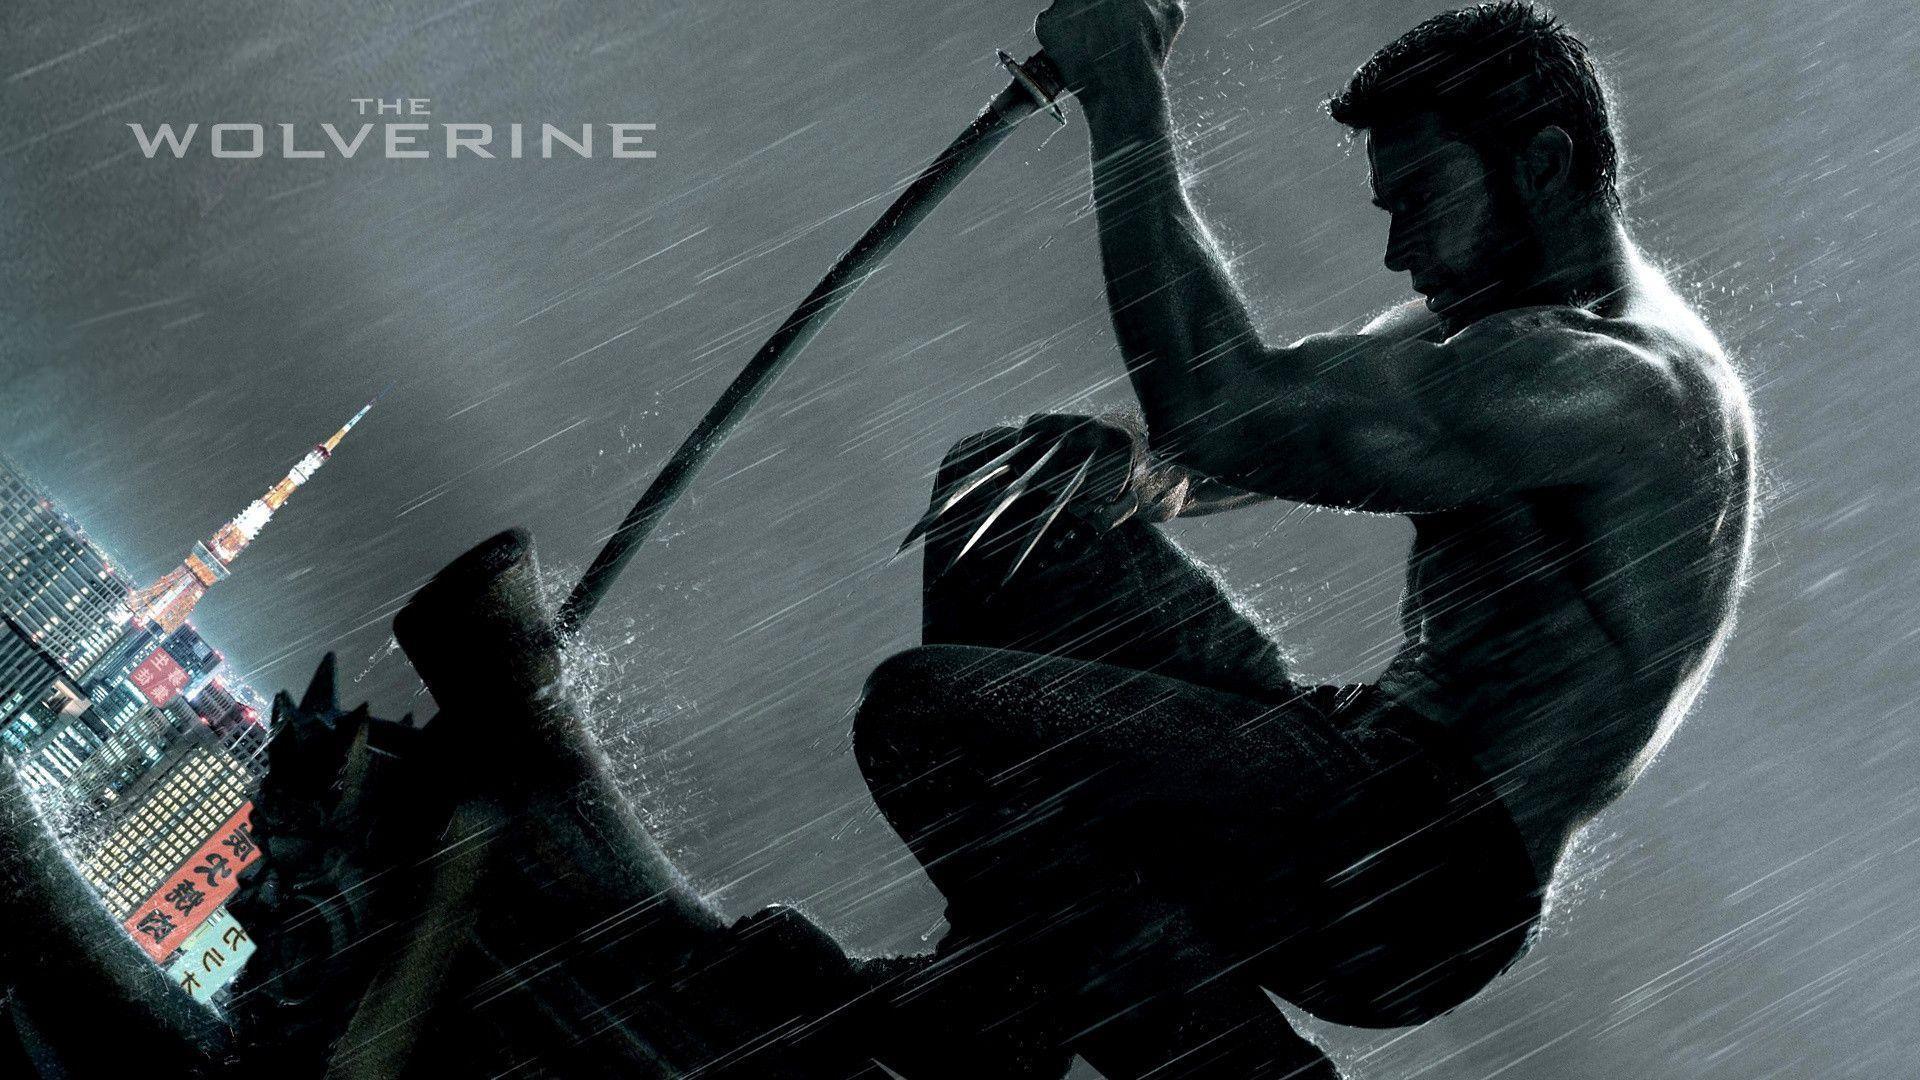 Wallpapers Tagged With WOLVERINE